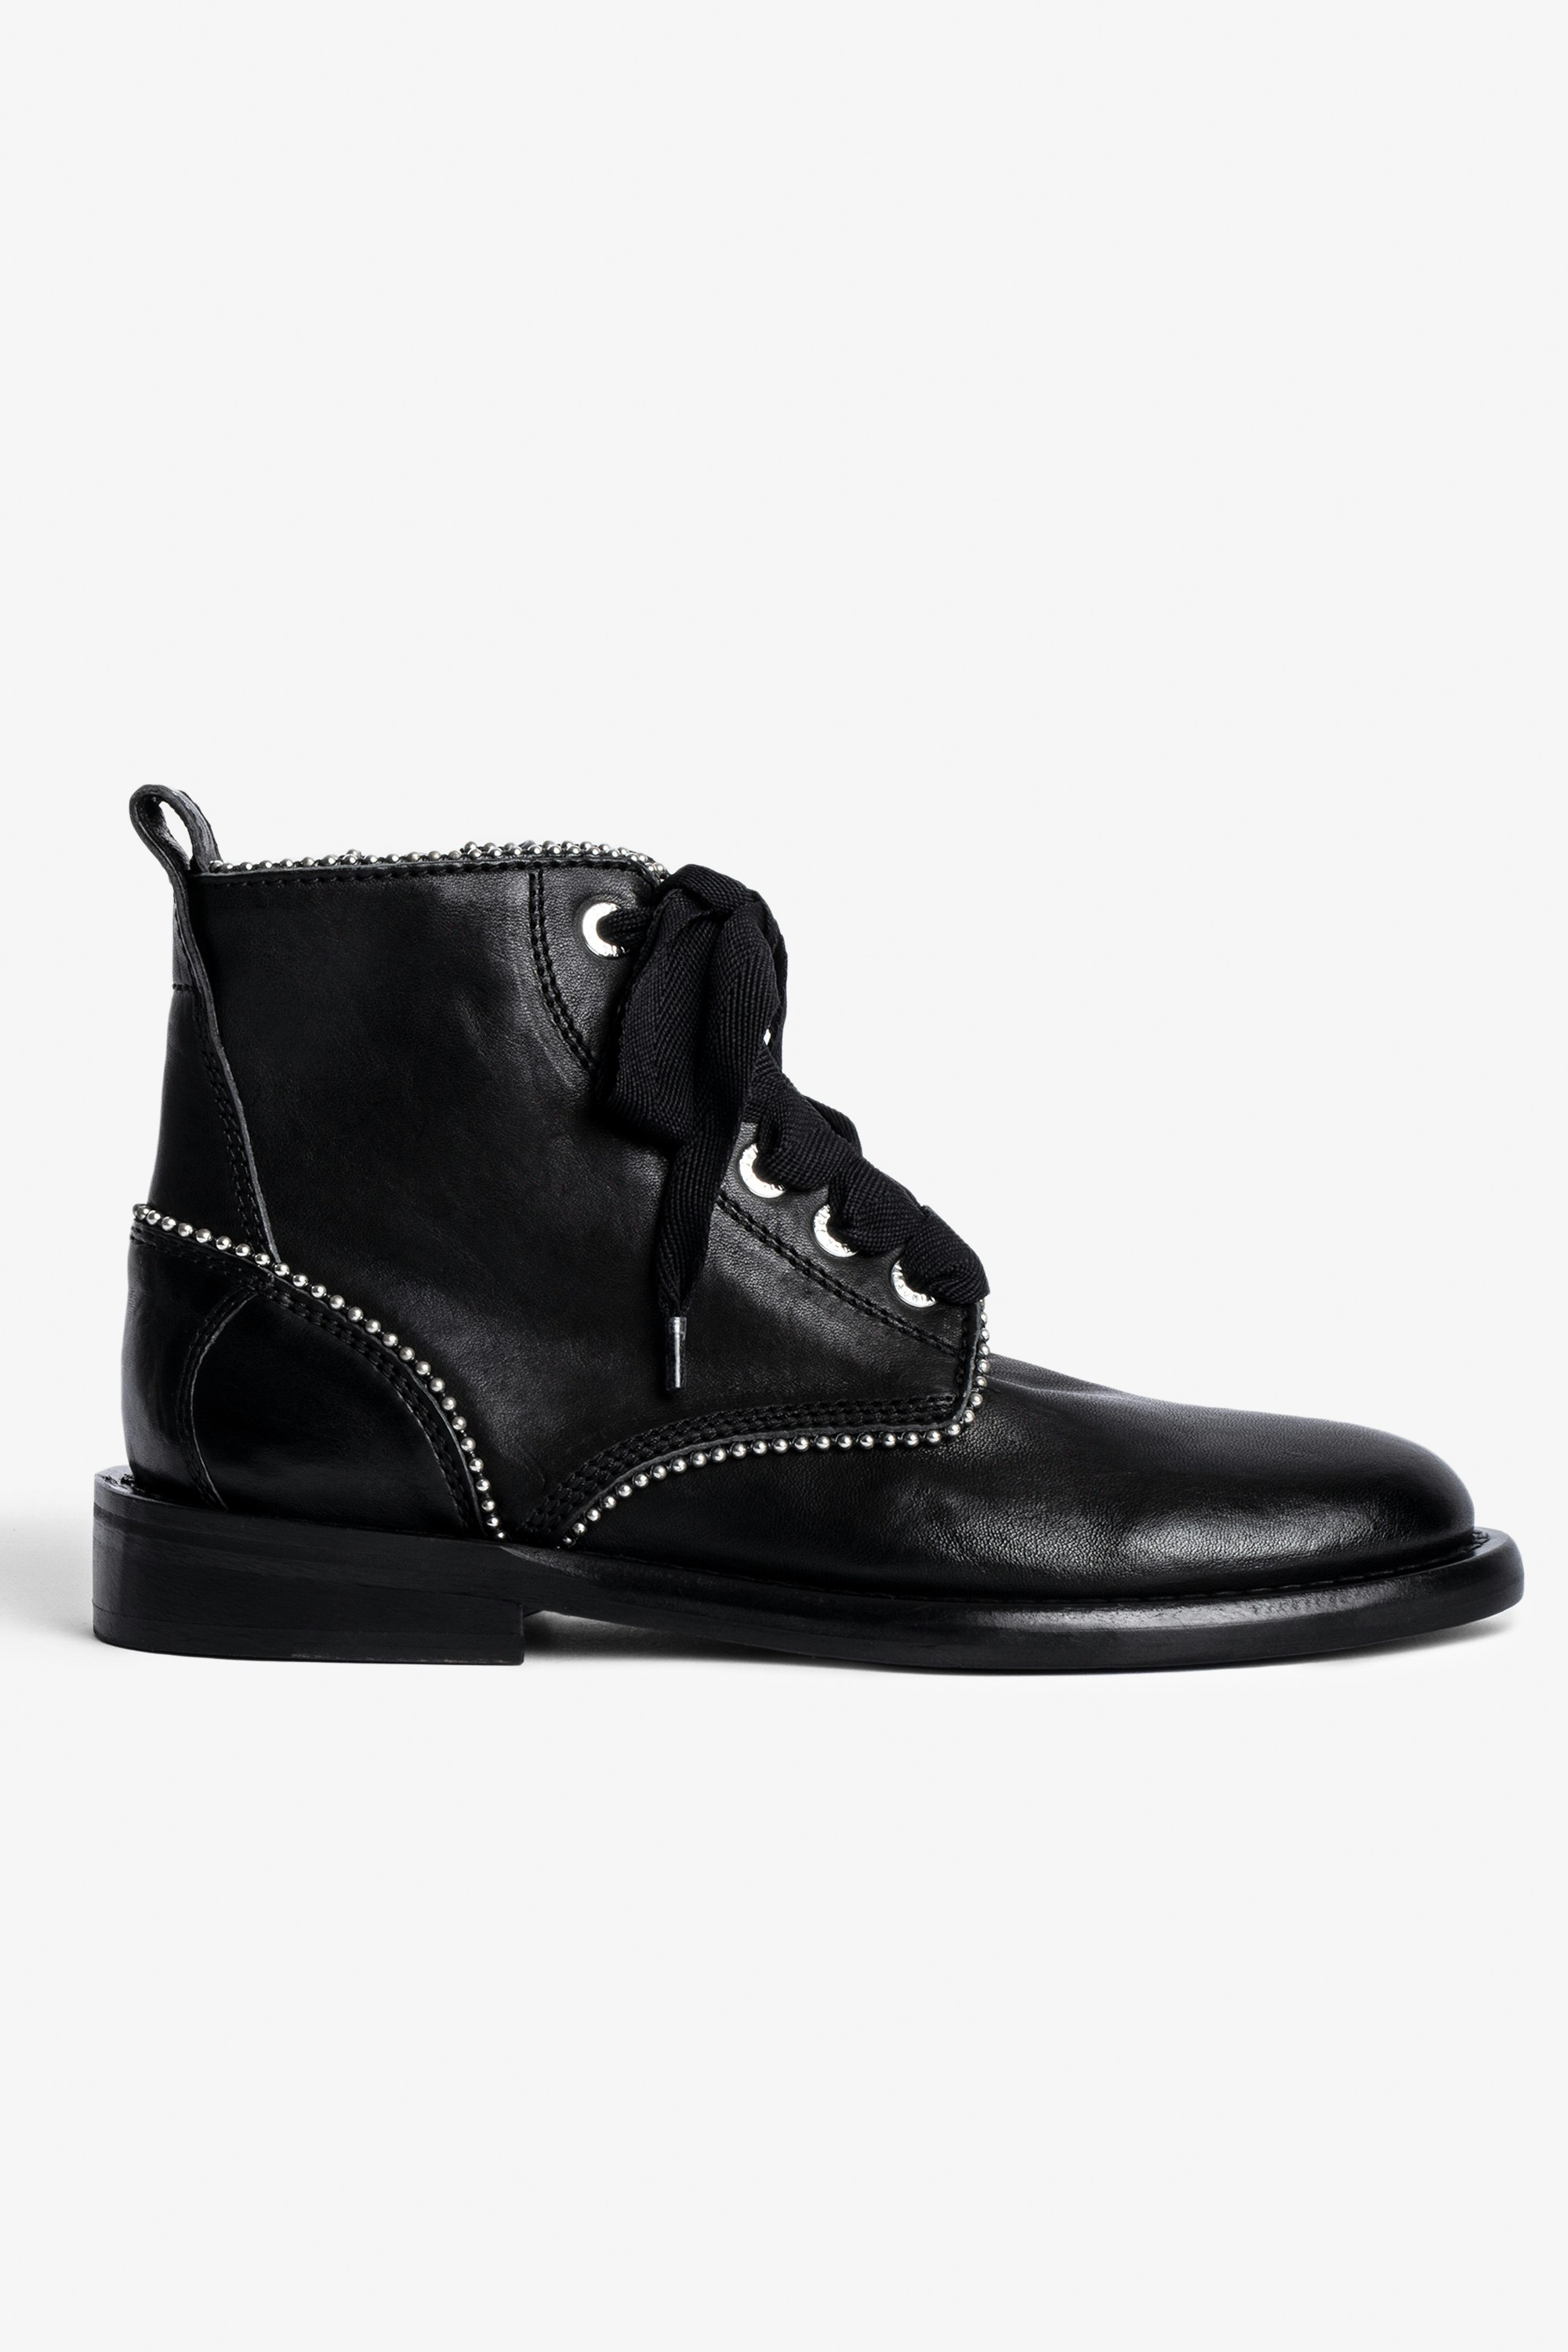 Laureen Roma Studs Ankle Boots - Women’s black leather lace-up ankle boots